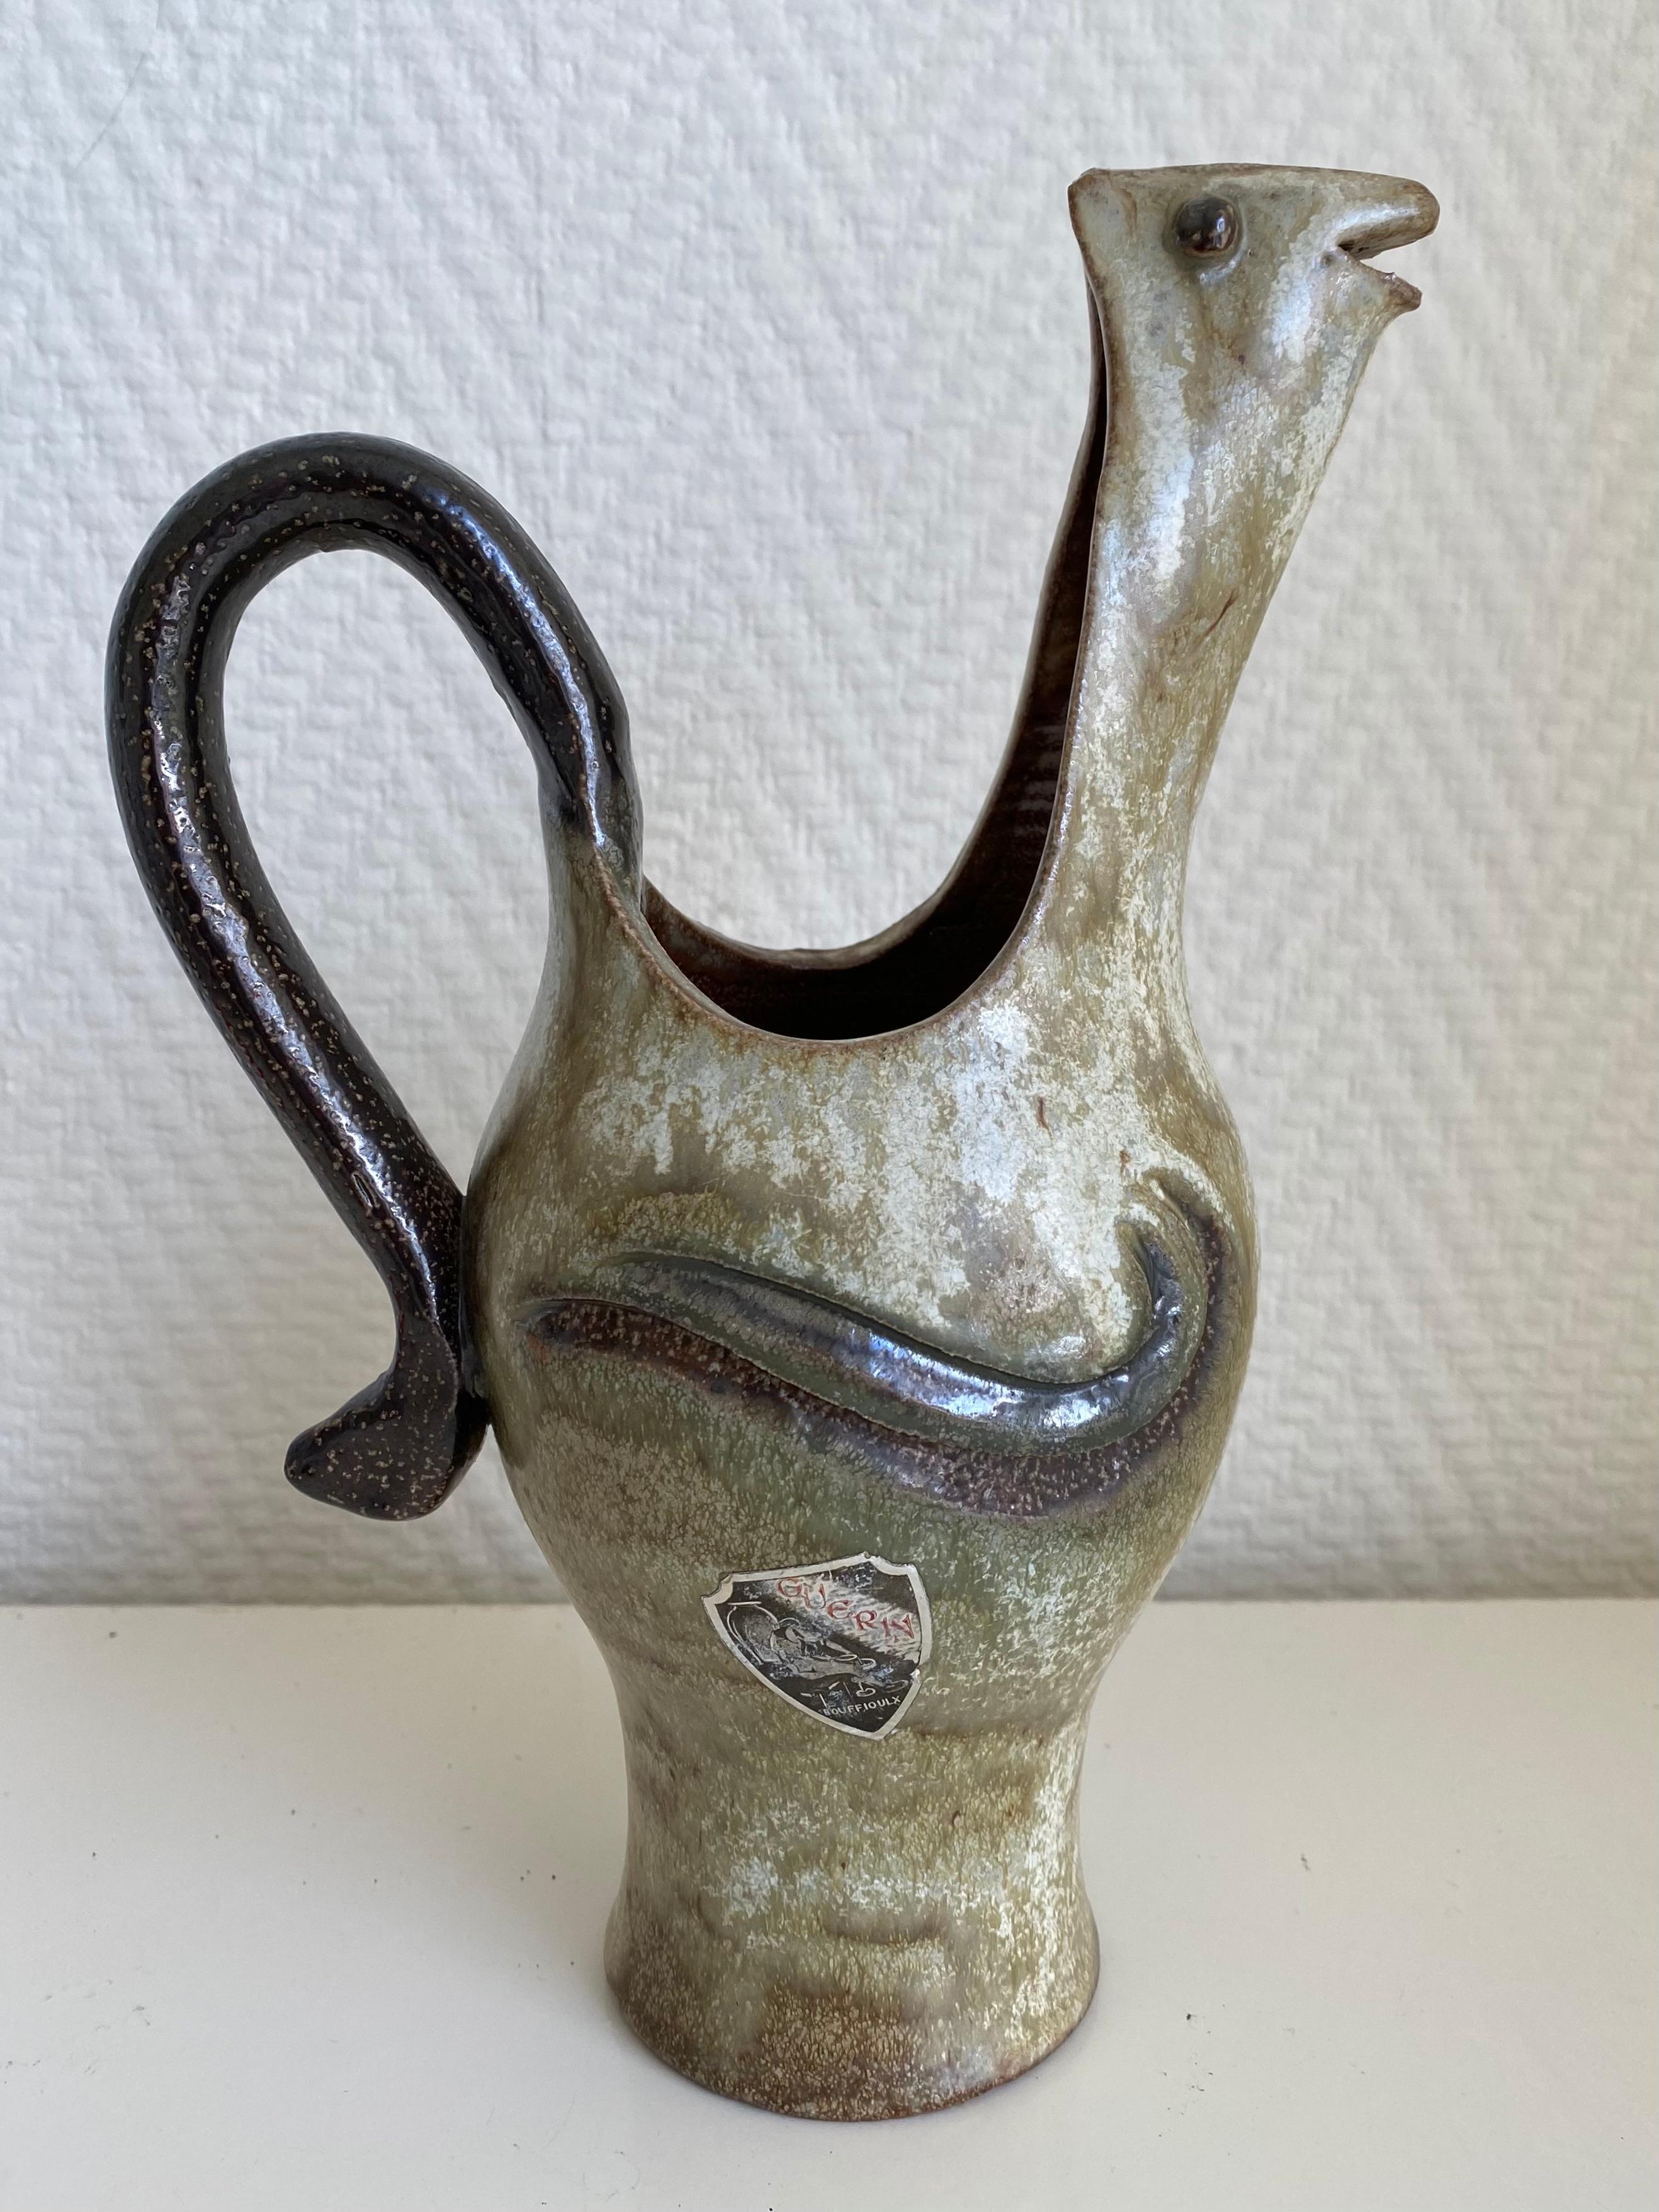 Stunning Belgian decanter by Roger Guérin, who was clearly inspired by Picasso when making this piece. The Decanter was Labeled 'Guérin Bouffioulx' and dates from circa 1930. It has an incised signature and number to the base and is offered in very